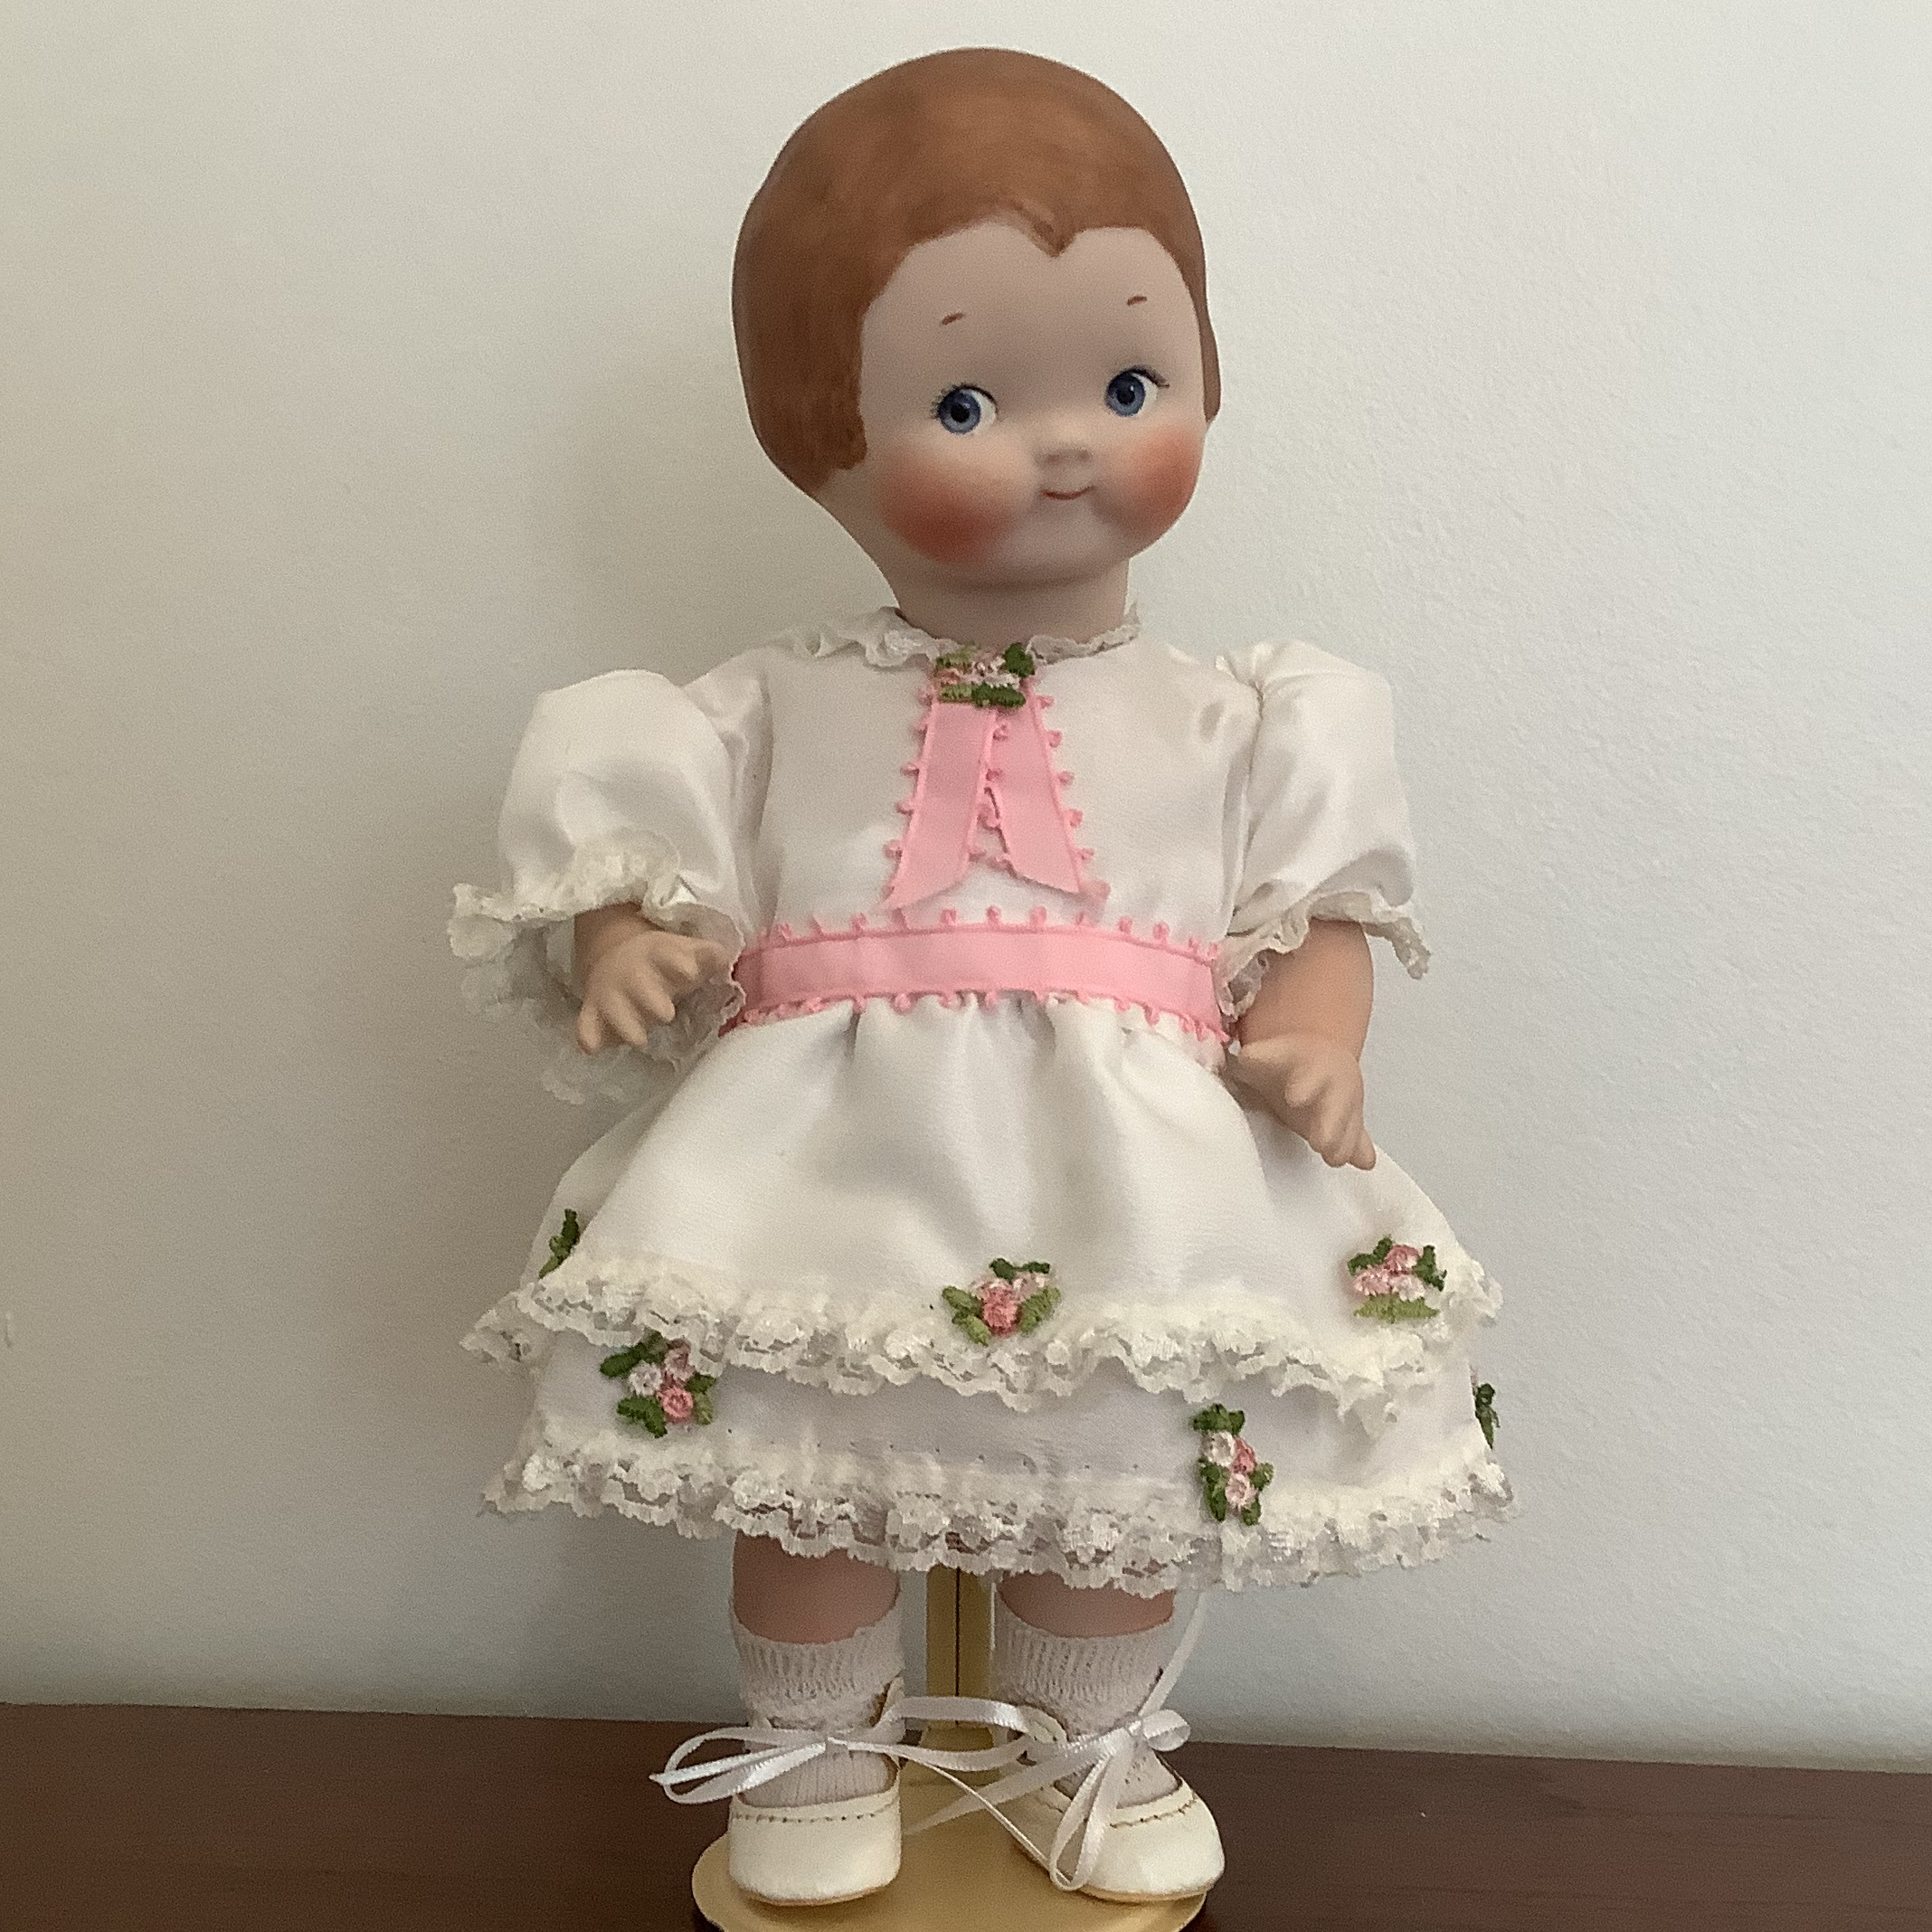 Reproduction doll in the style of Grace Drayton, 10 inches tall and wearing a white dress